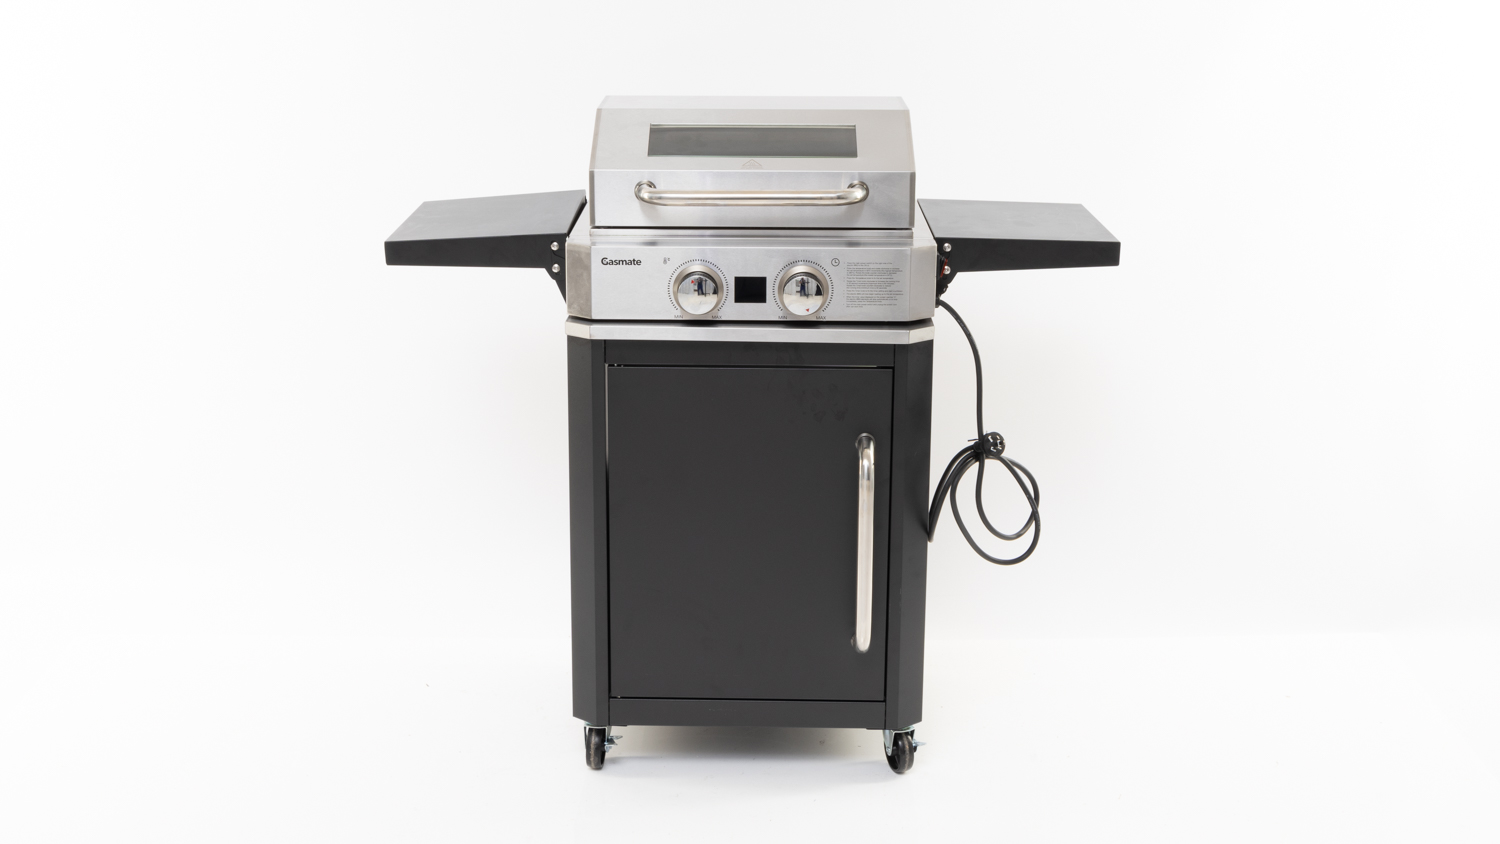 Gasmate Paragon Digital Electric BBQ with Cabinet Trolley BQE303 carousel image